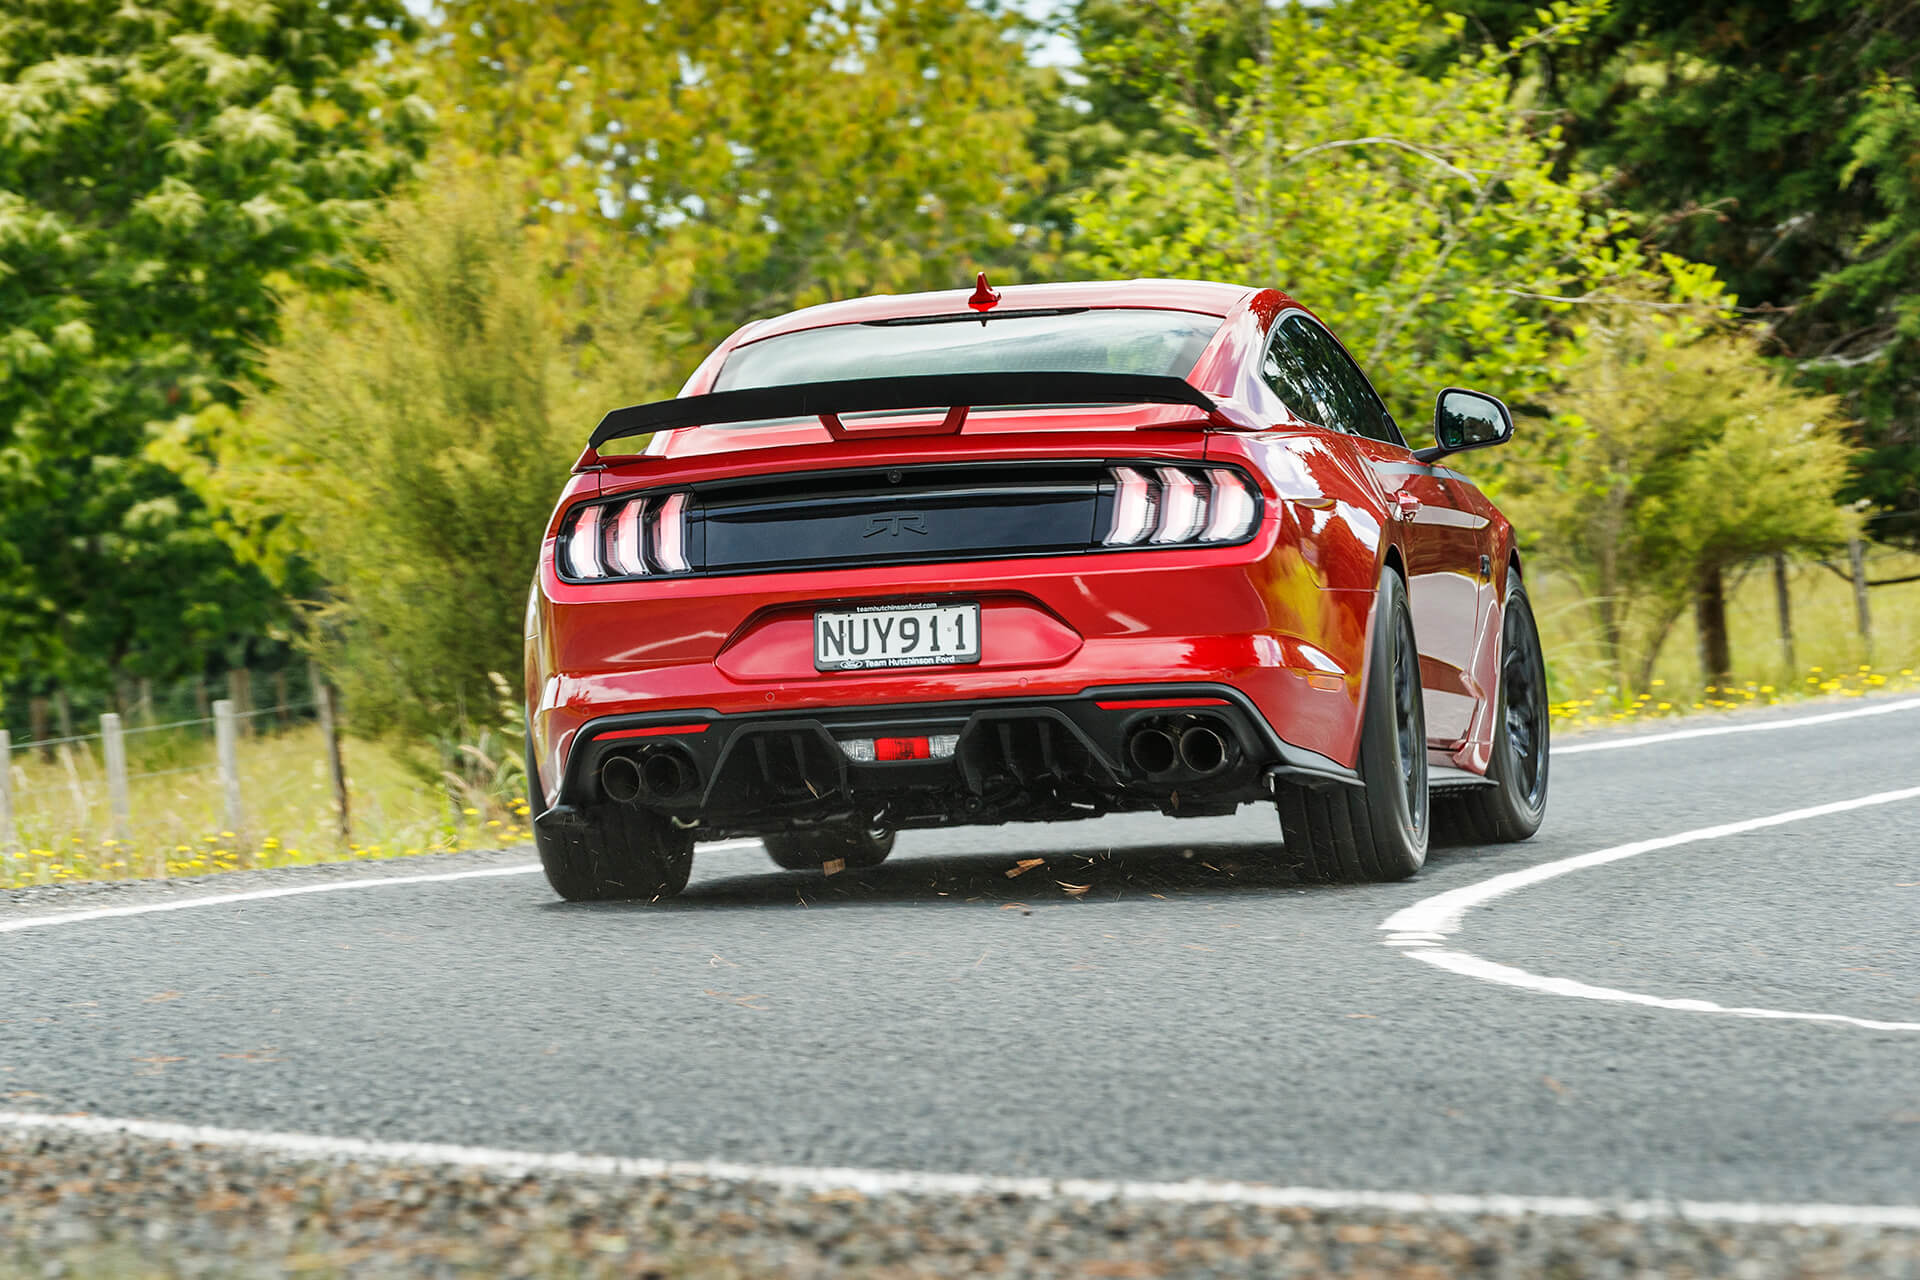 RTR Series 2 Mustang in Christchurch